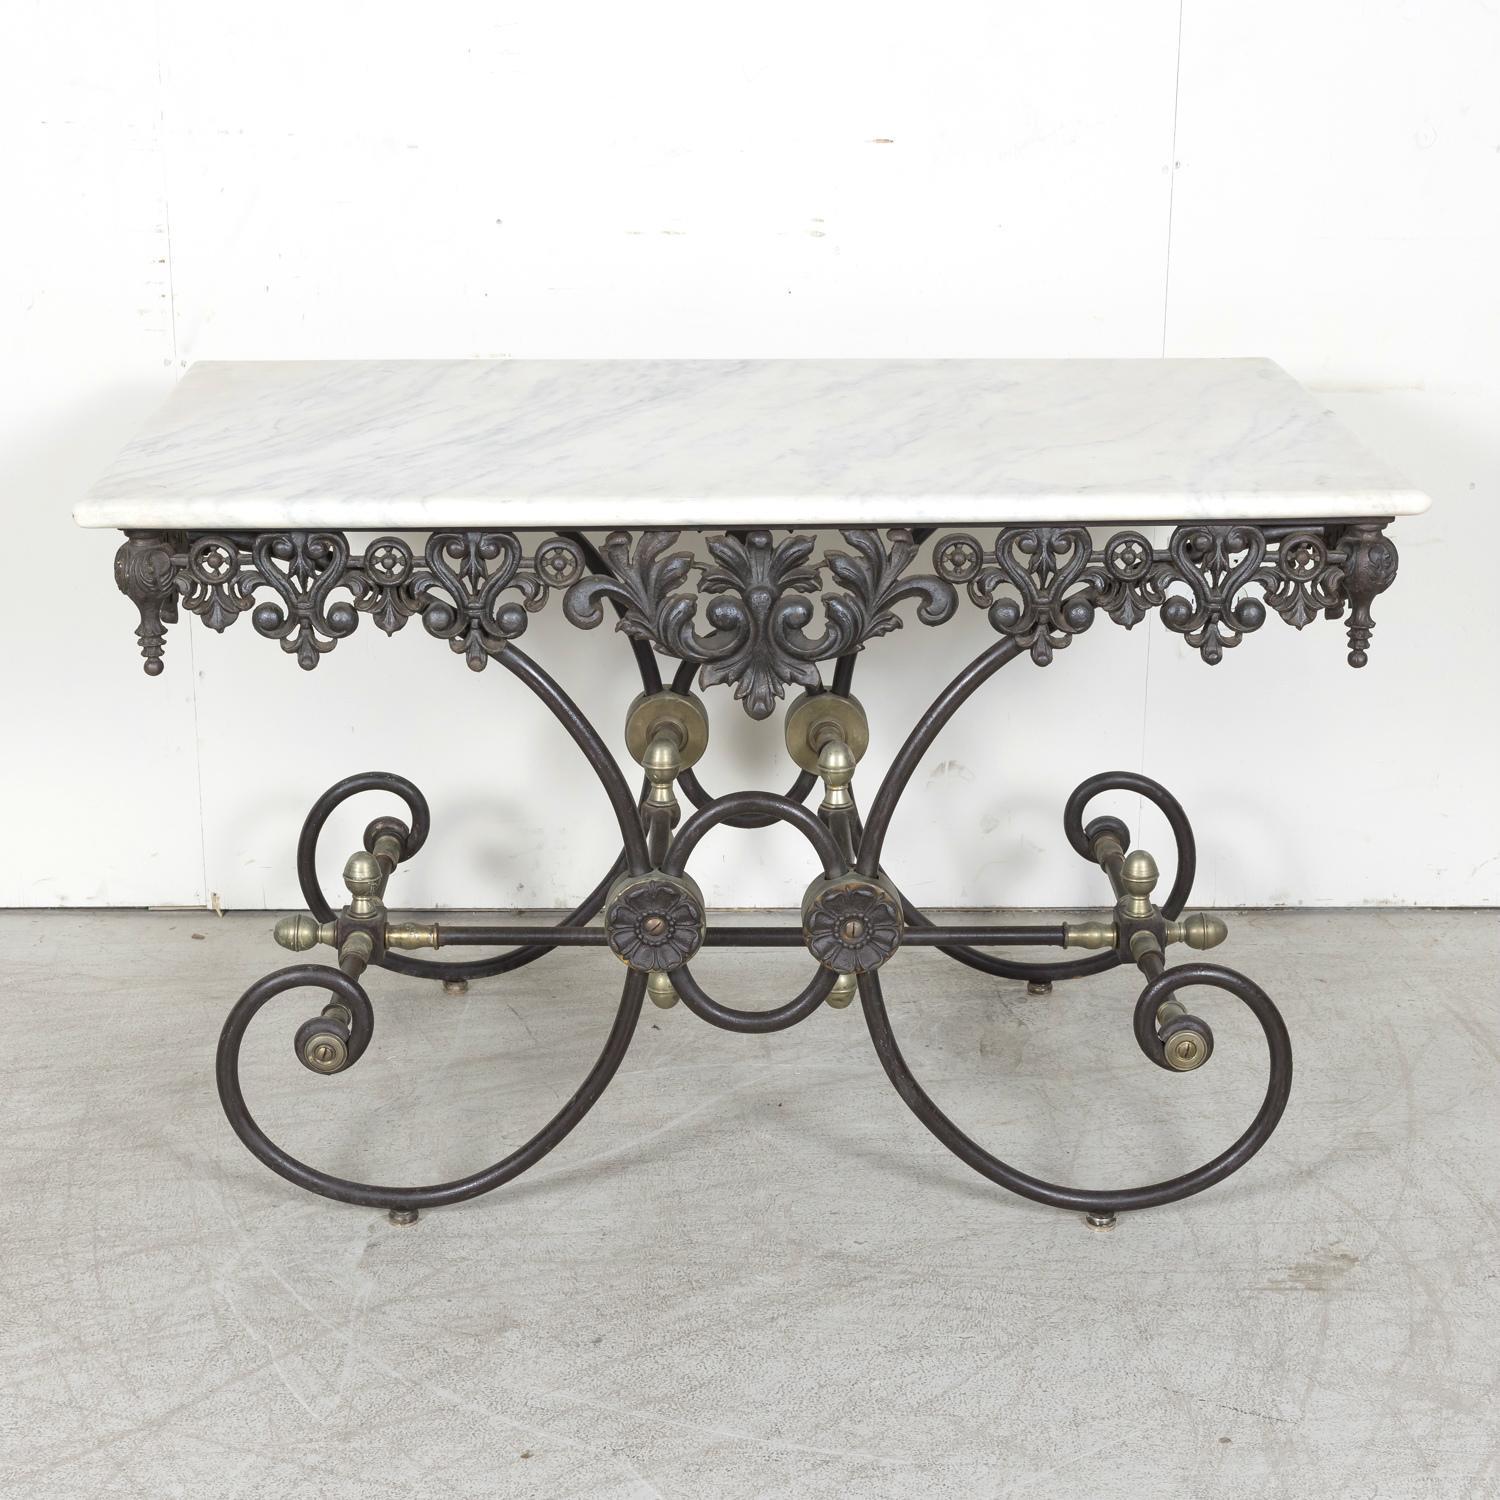 A vintage French patisserie or pastry table, circa 1940s, having a solid rectangular Carrara marble top above a wrought iron apron featuring attractive pierced foliate and stylized fleur de lis details. Supported on a scrolling iron frame joined by